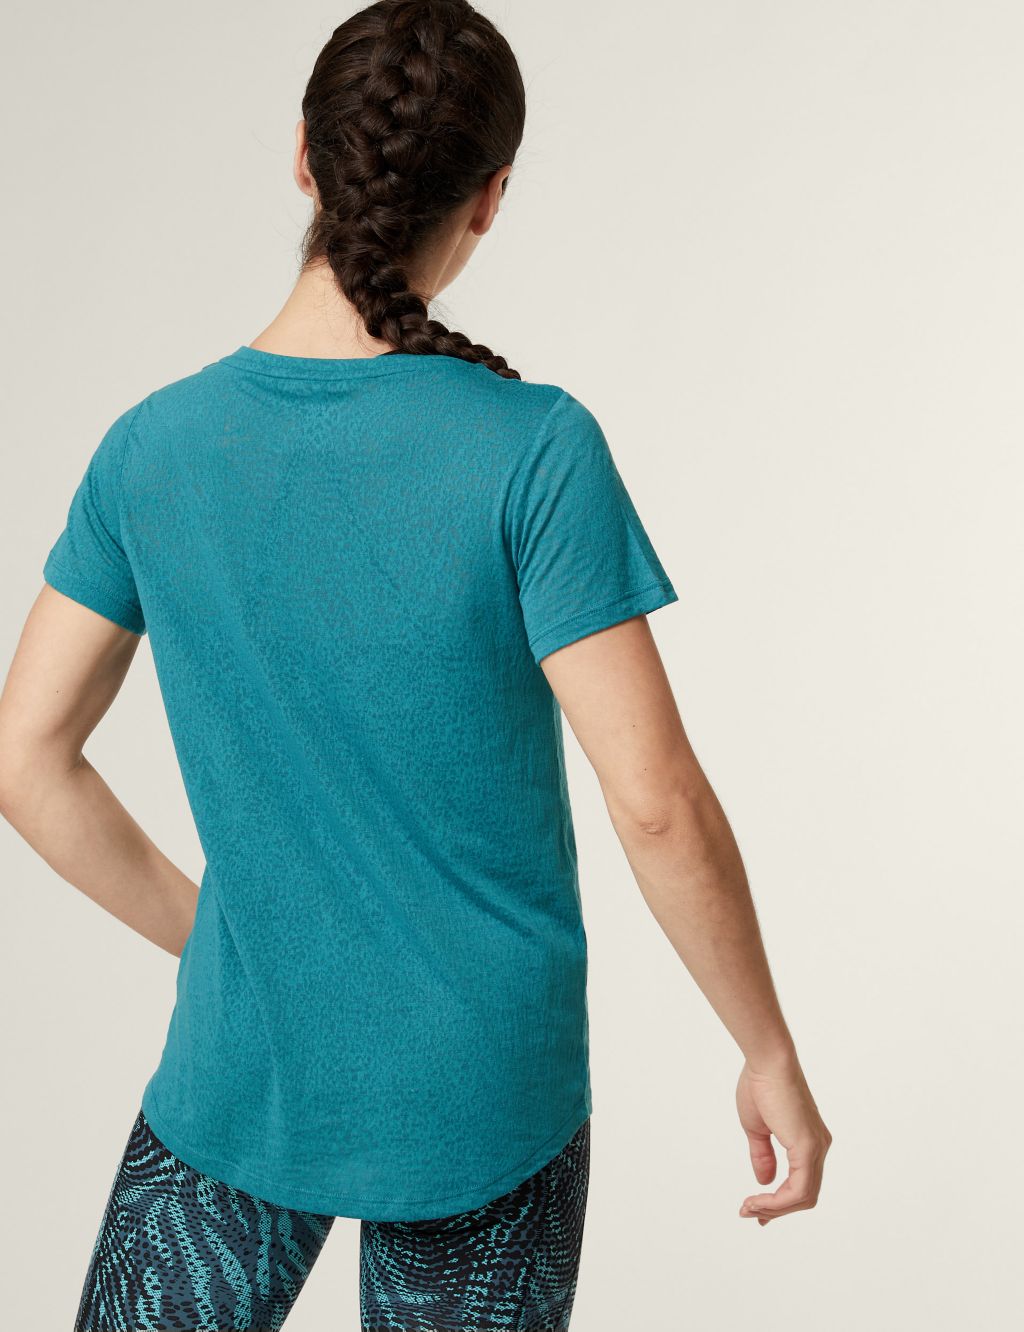 Lightweight Scoop Neck Relaxed T-Shirt image 4